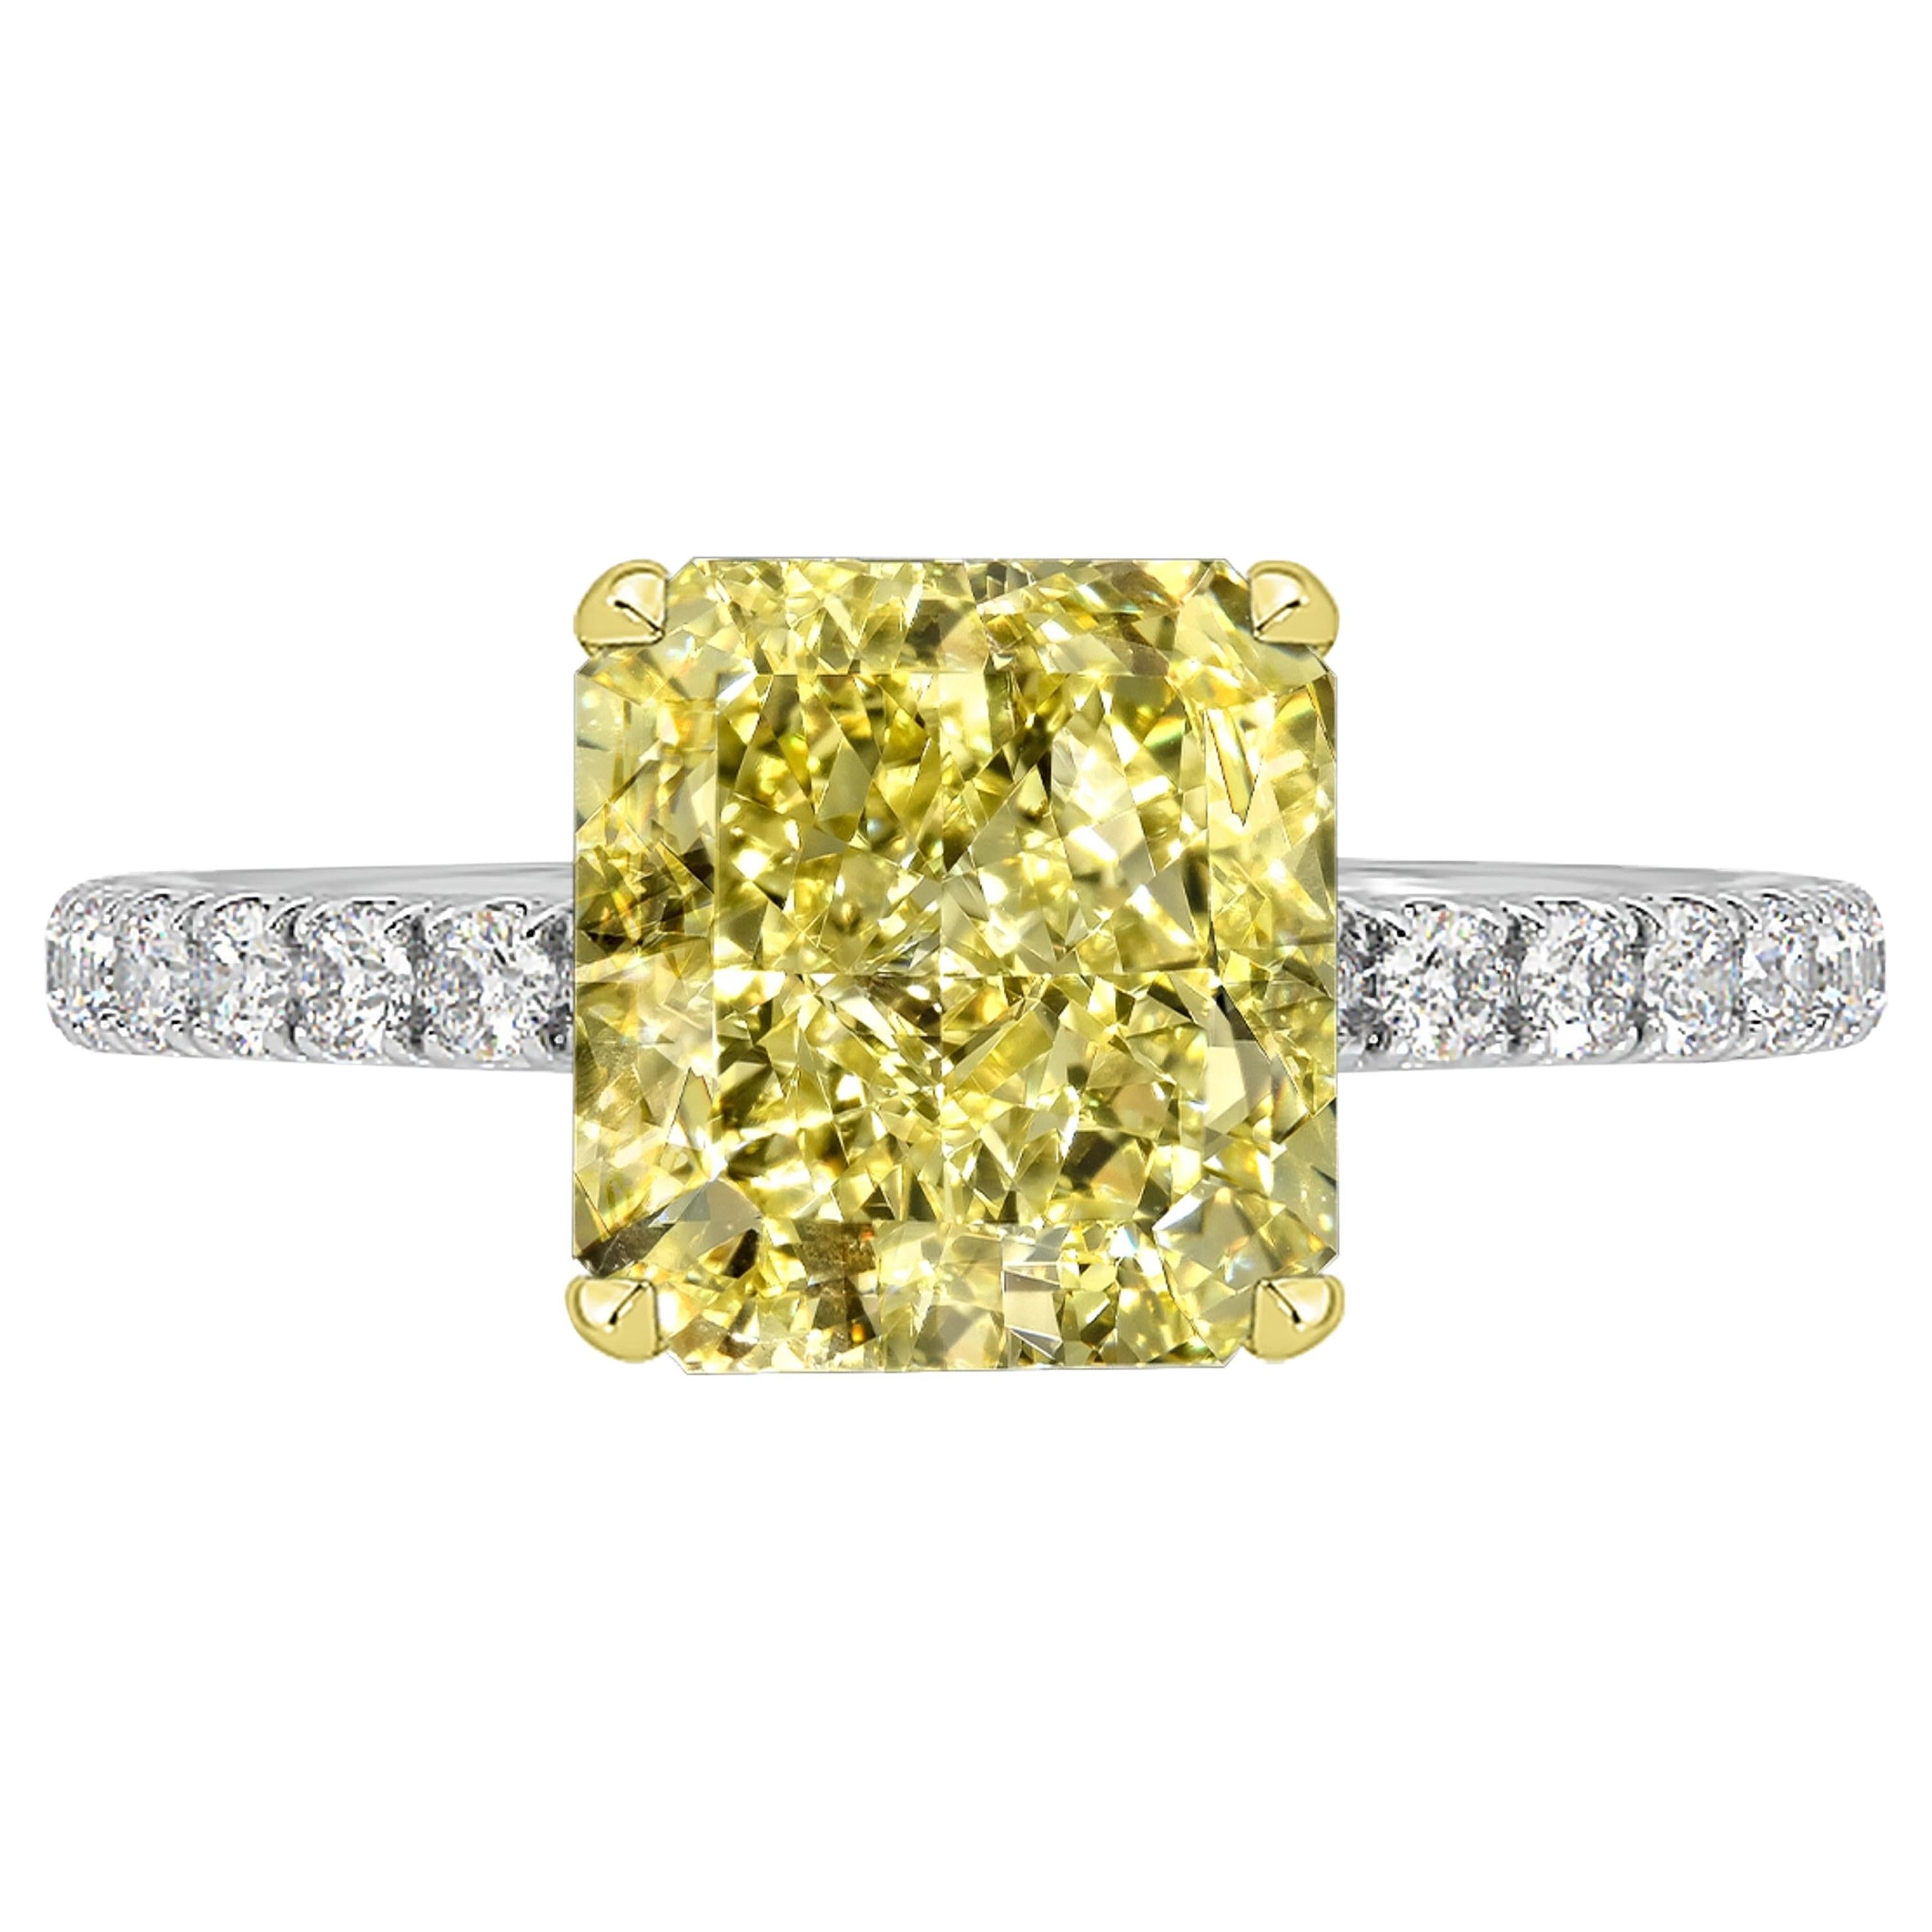 GIA Certified 3.07 Carat Radiant Cut Yellow Diamond Ring For Sale